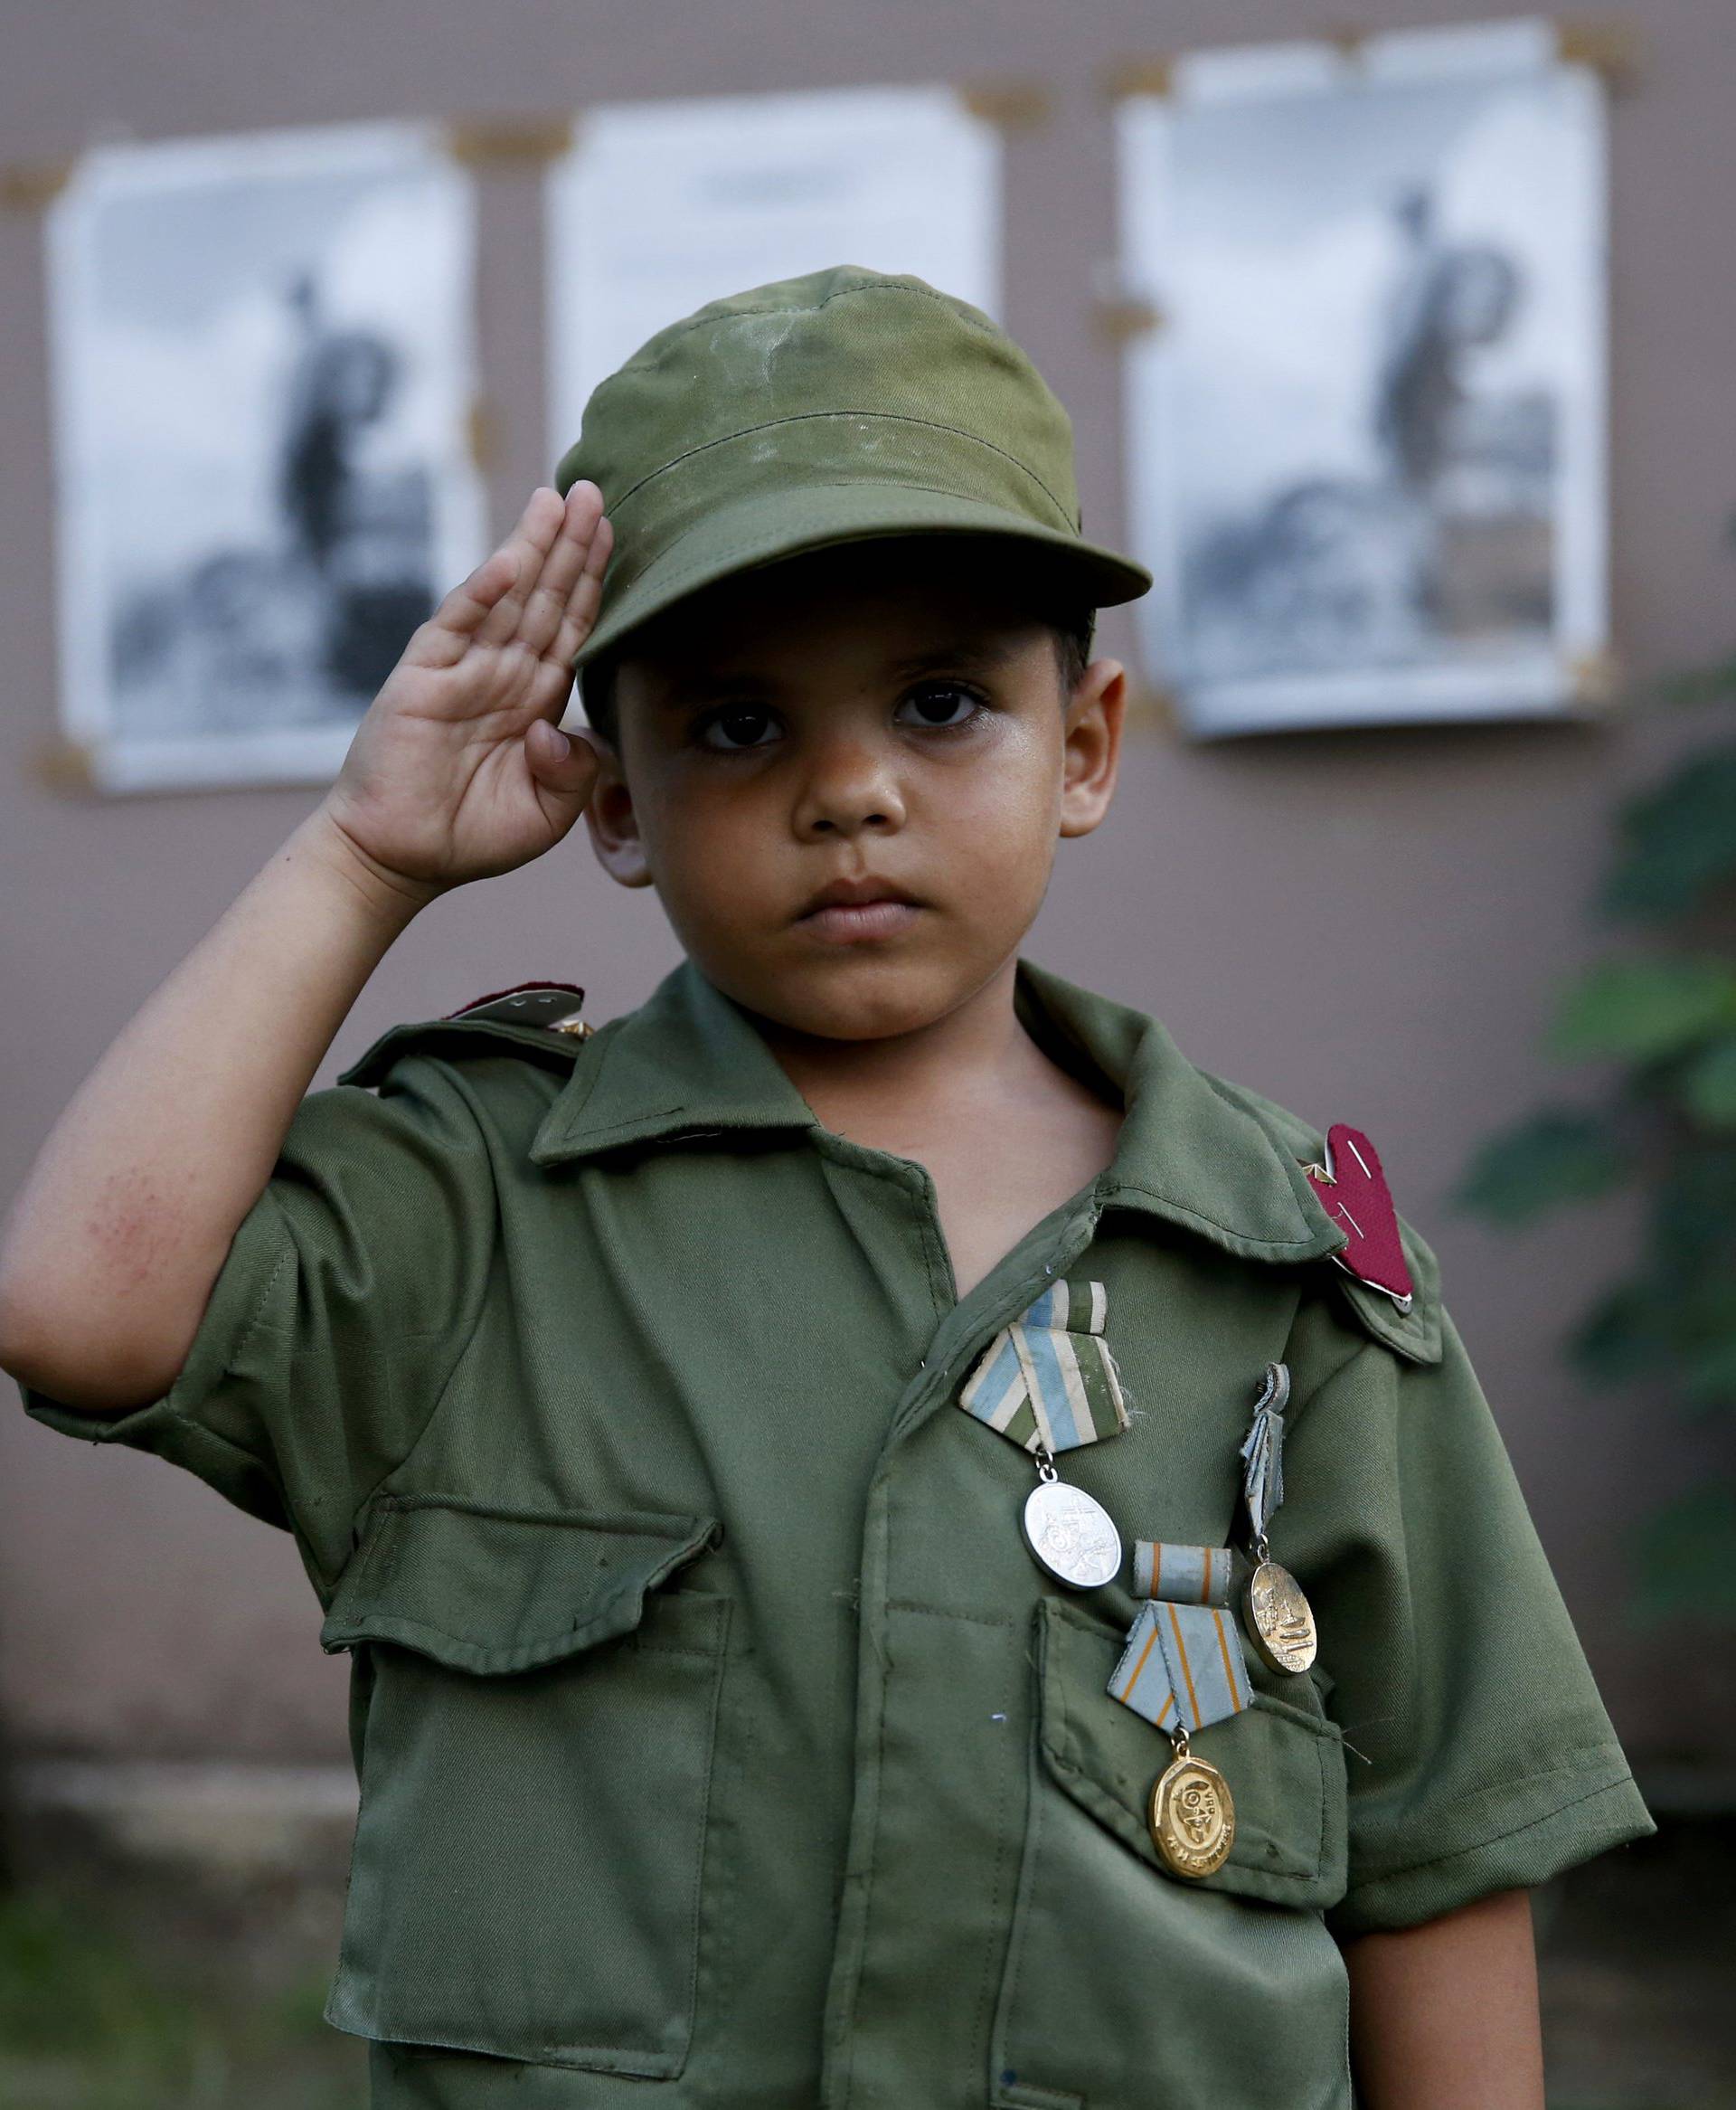 Child salutes while awaiting the caravan carrying Castro's ashes in Camaguey